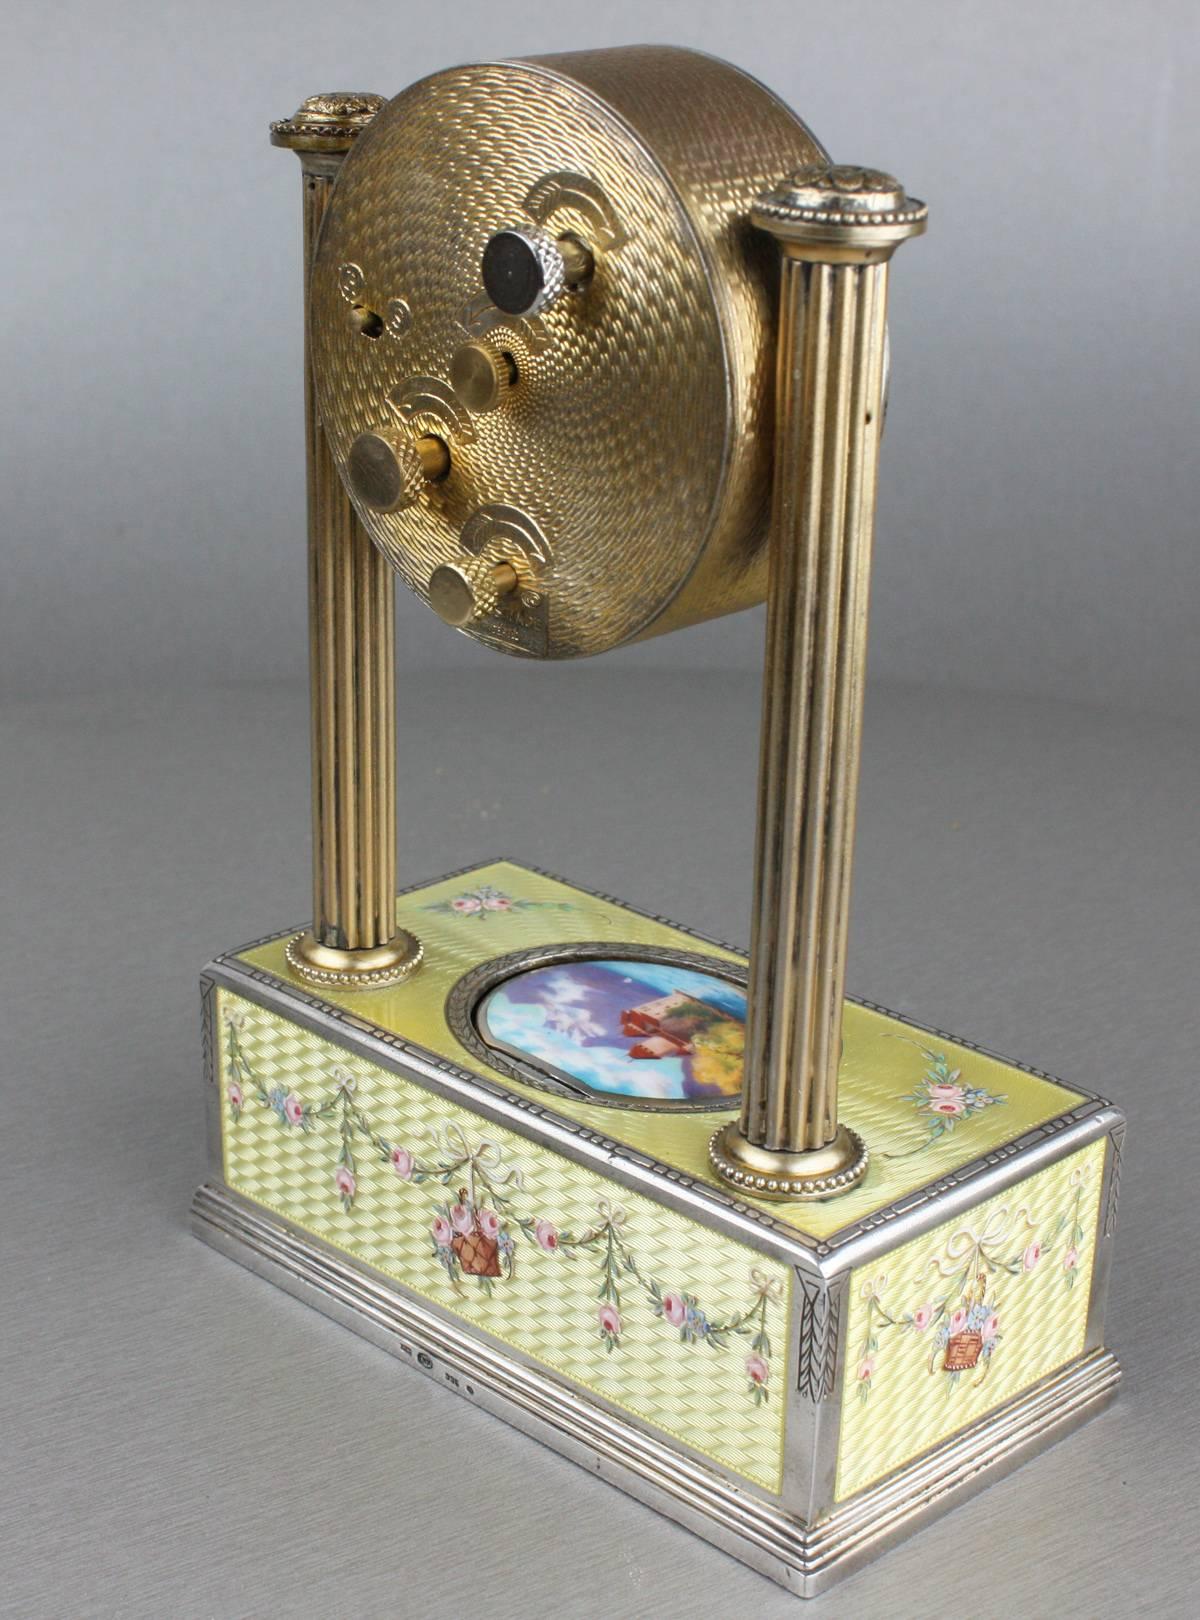 Swiss Silver Gilt and Enamel Alarm-Actuated Singing Bird Box, by C. H. Marguerat